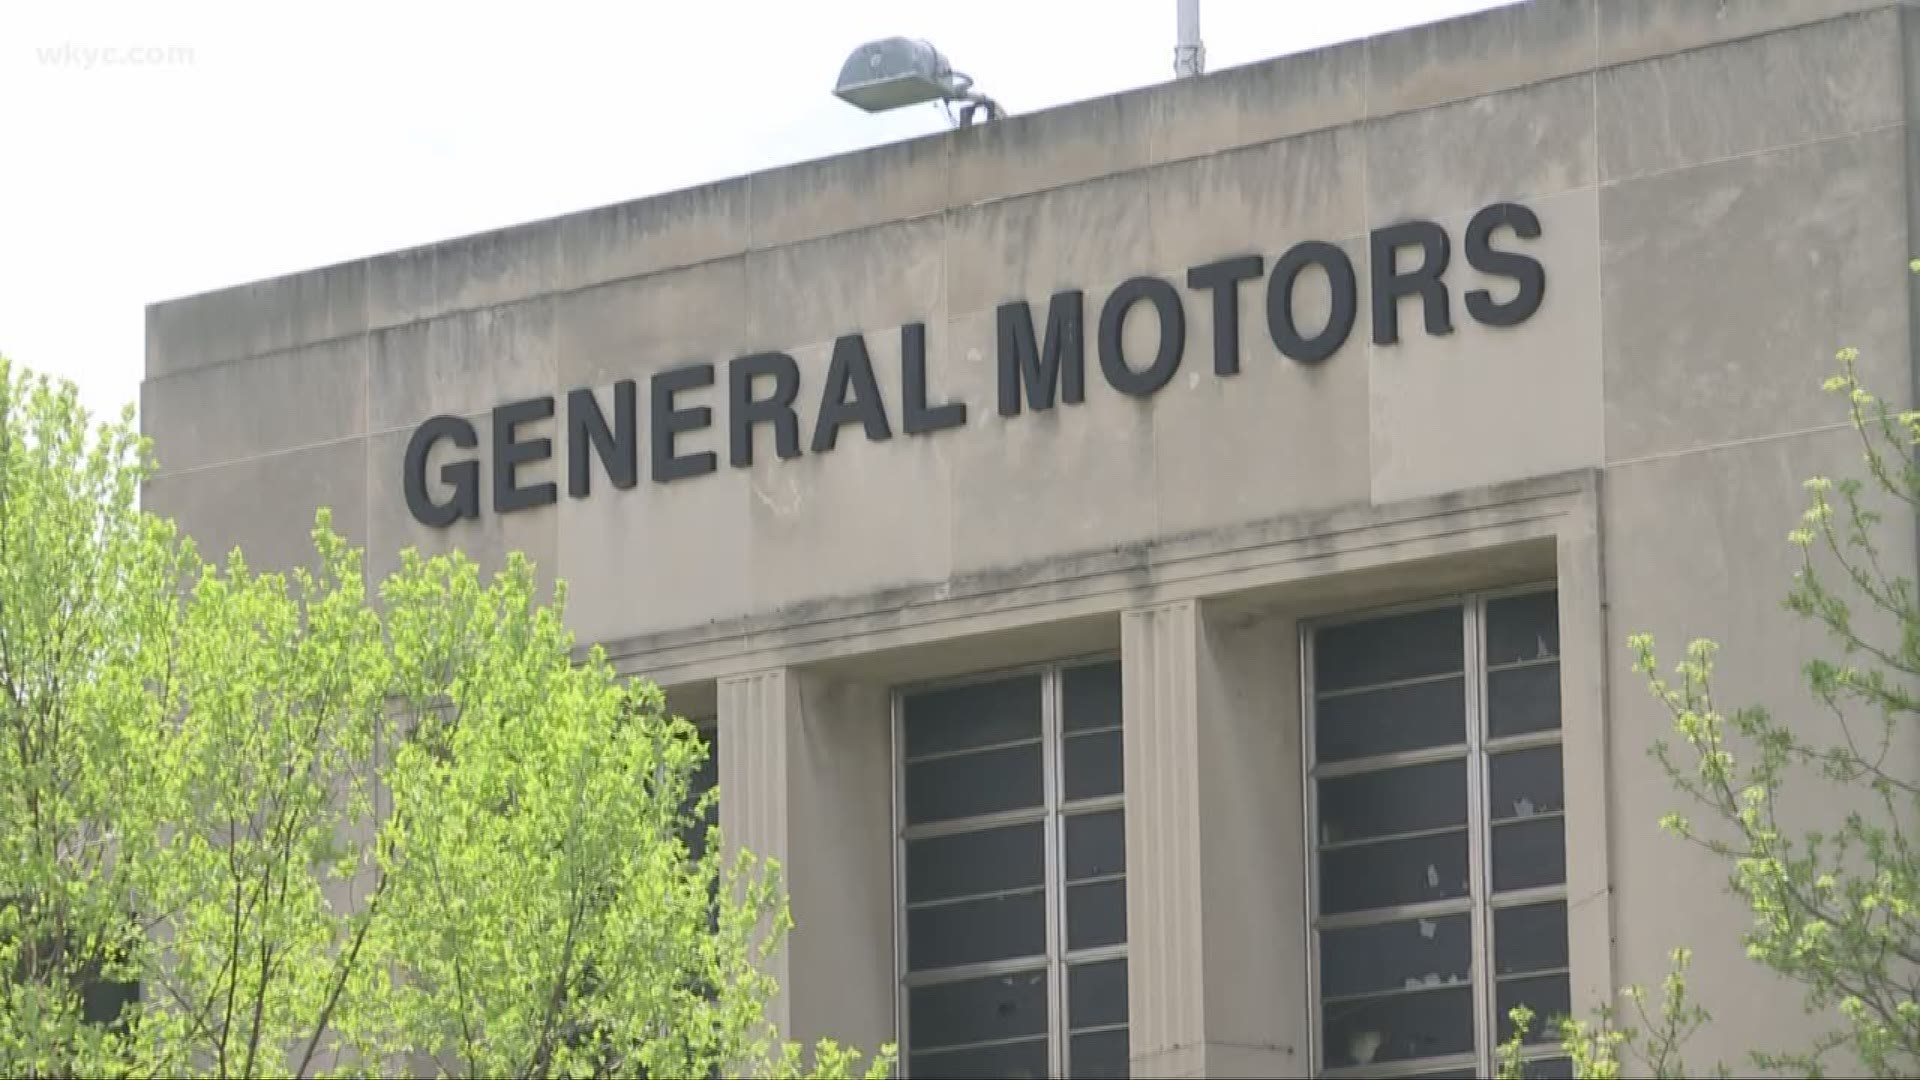 Parma reacts to General Motors' announcement of new jobs for the city's metal center